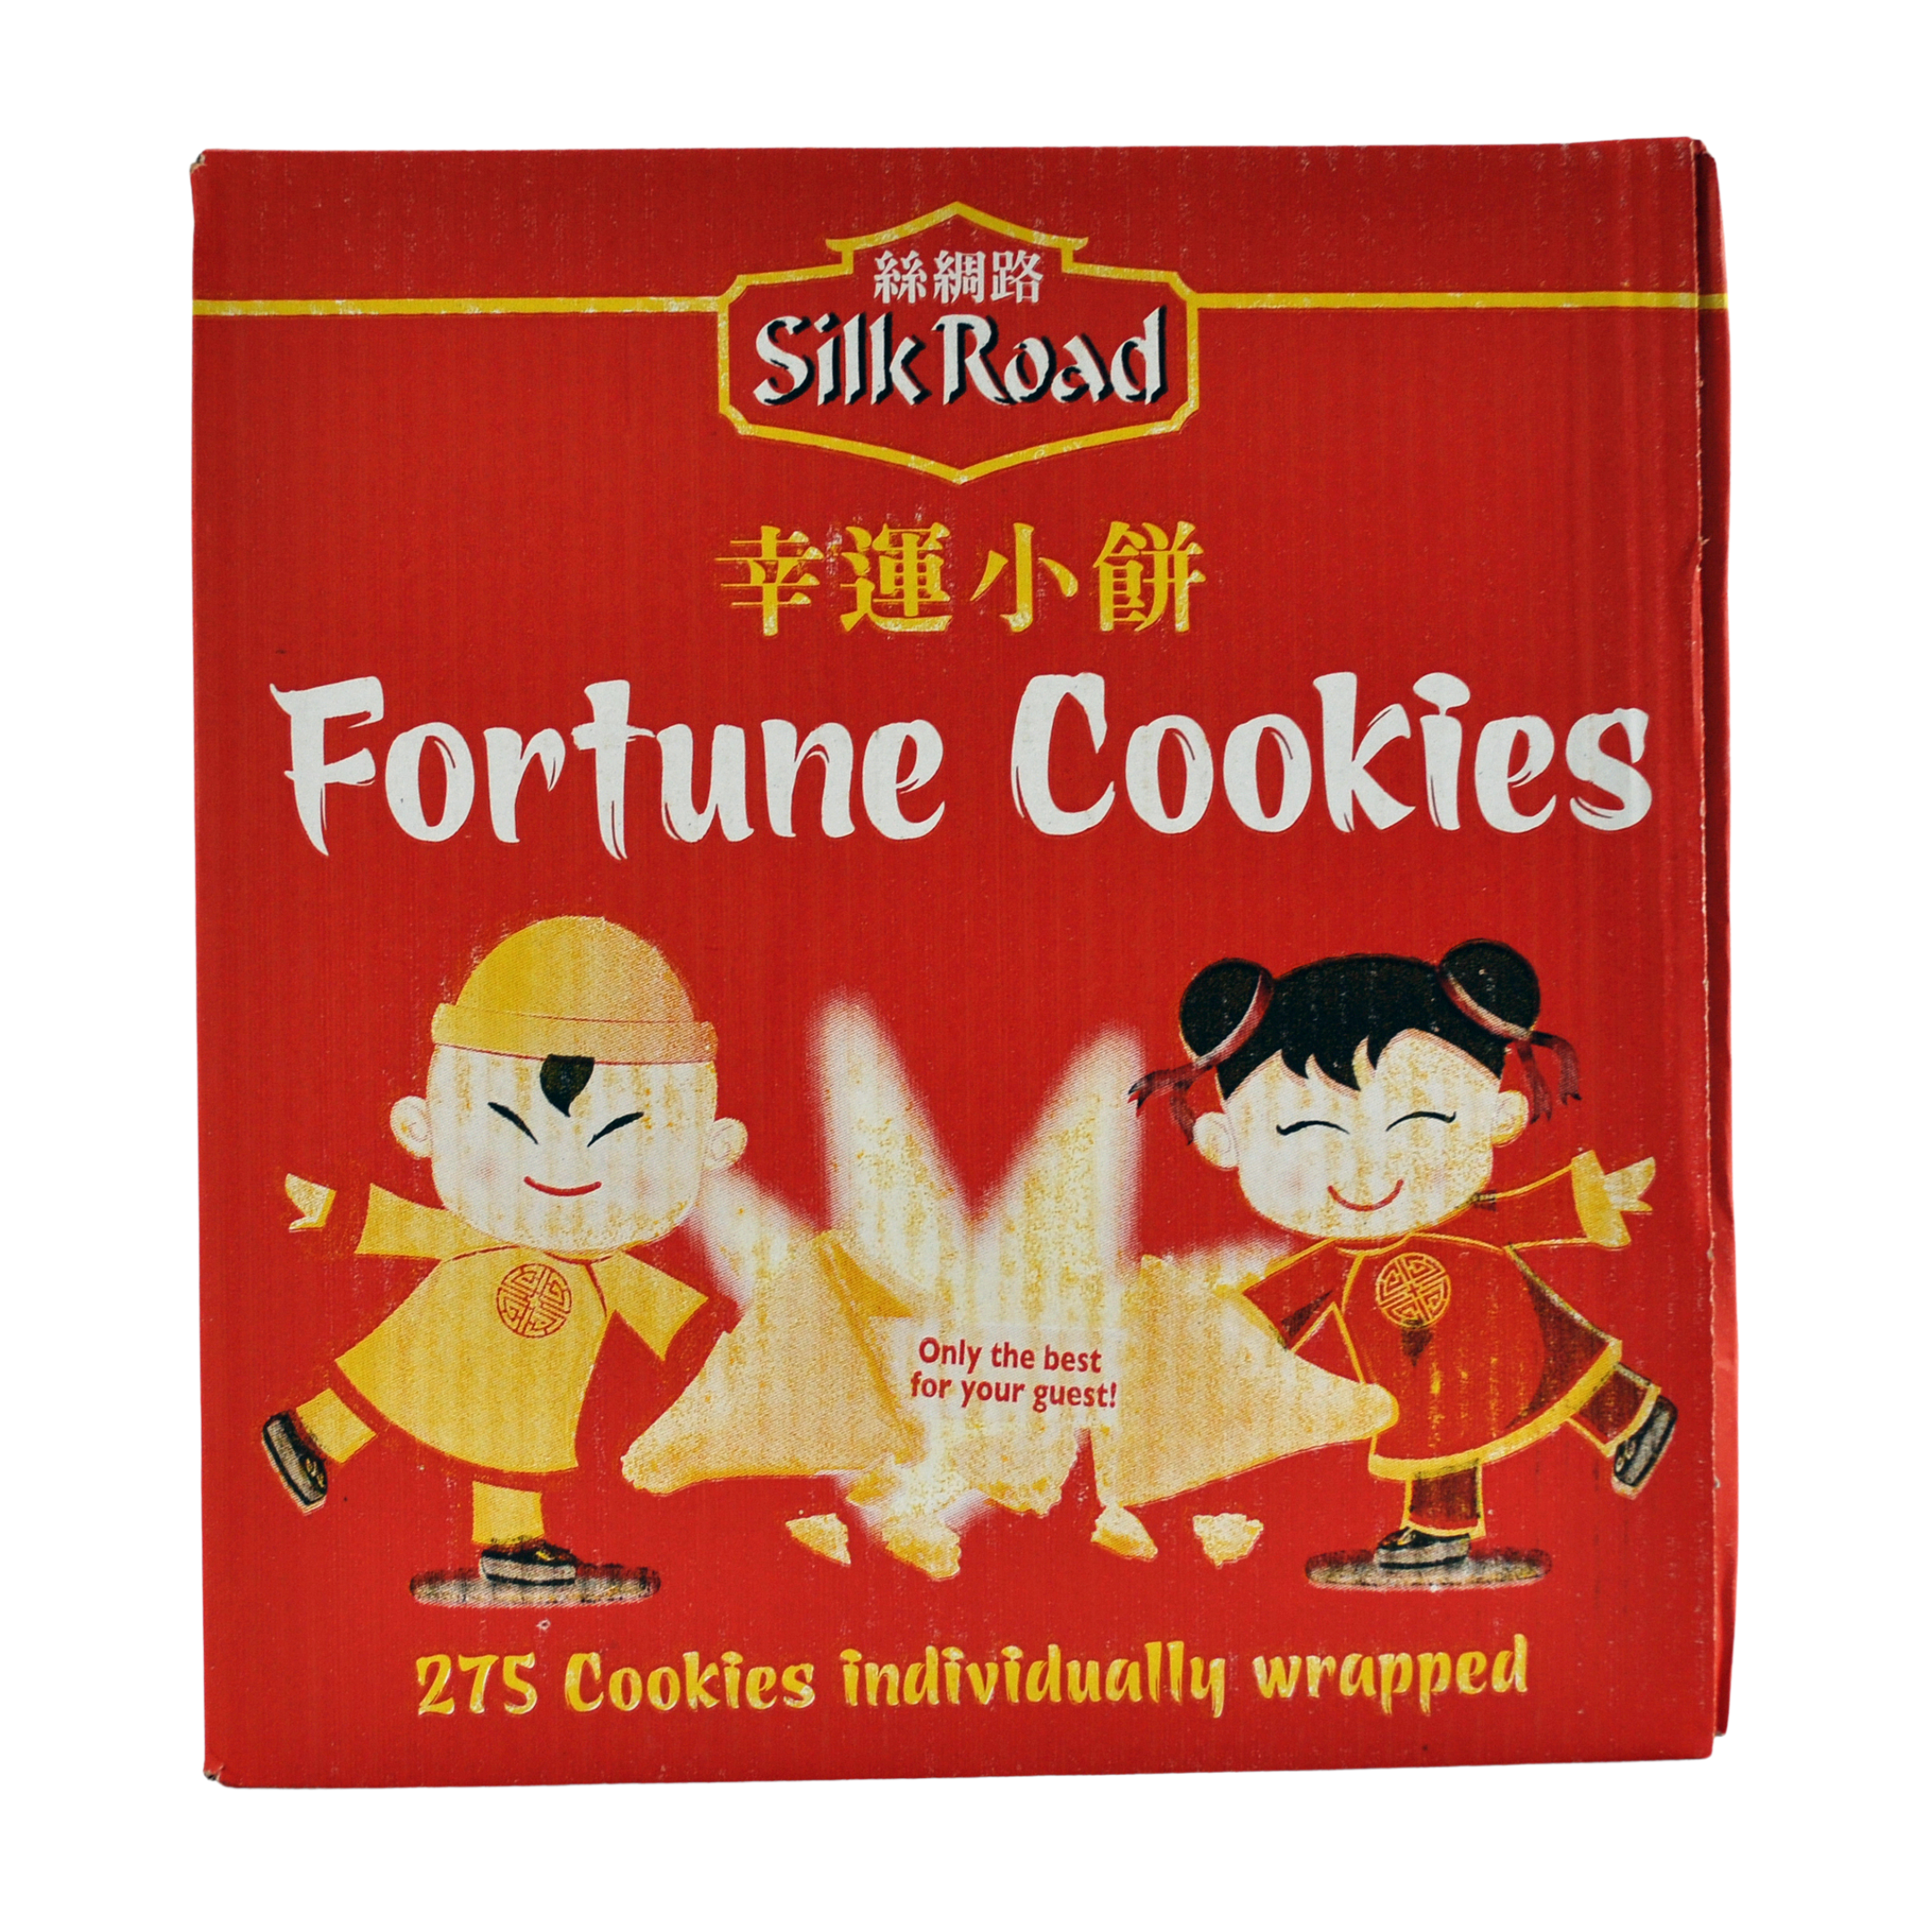 Fortune Cookies (275 pieces) by Silk Road